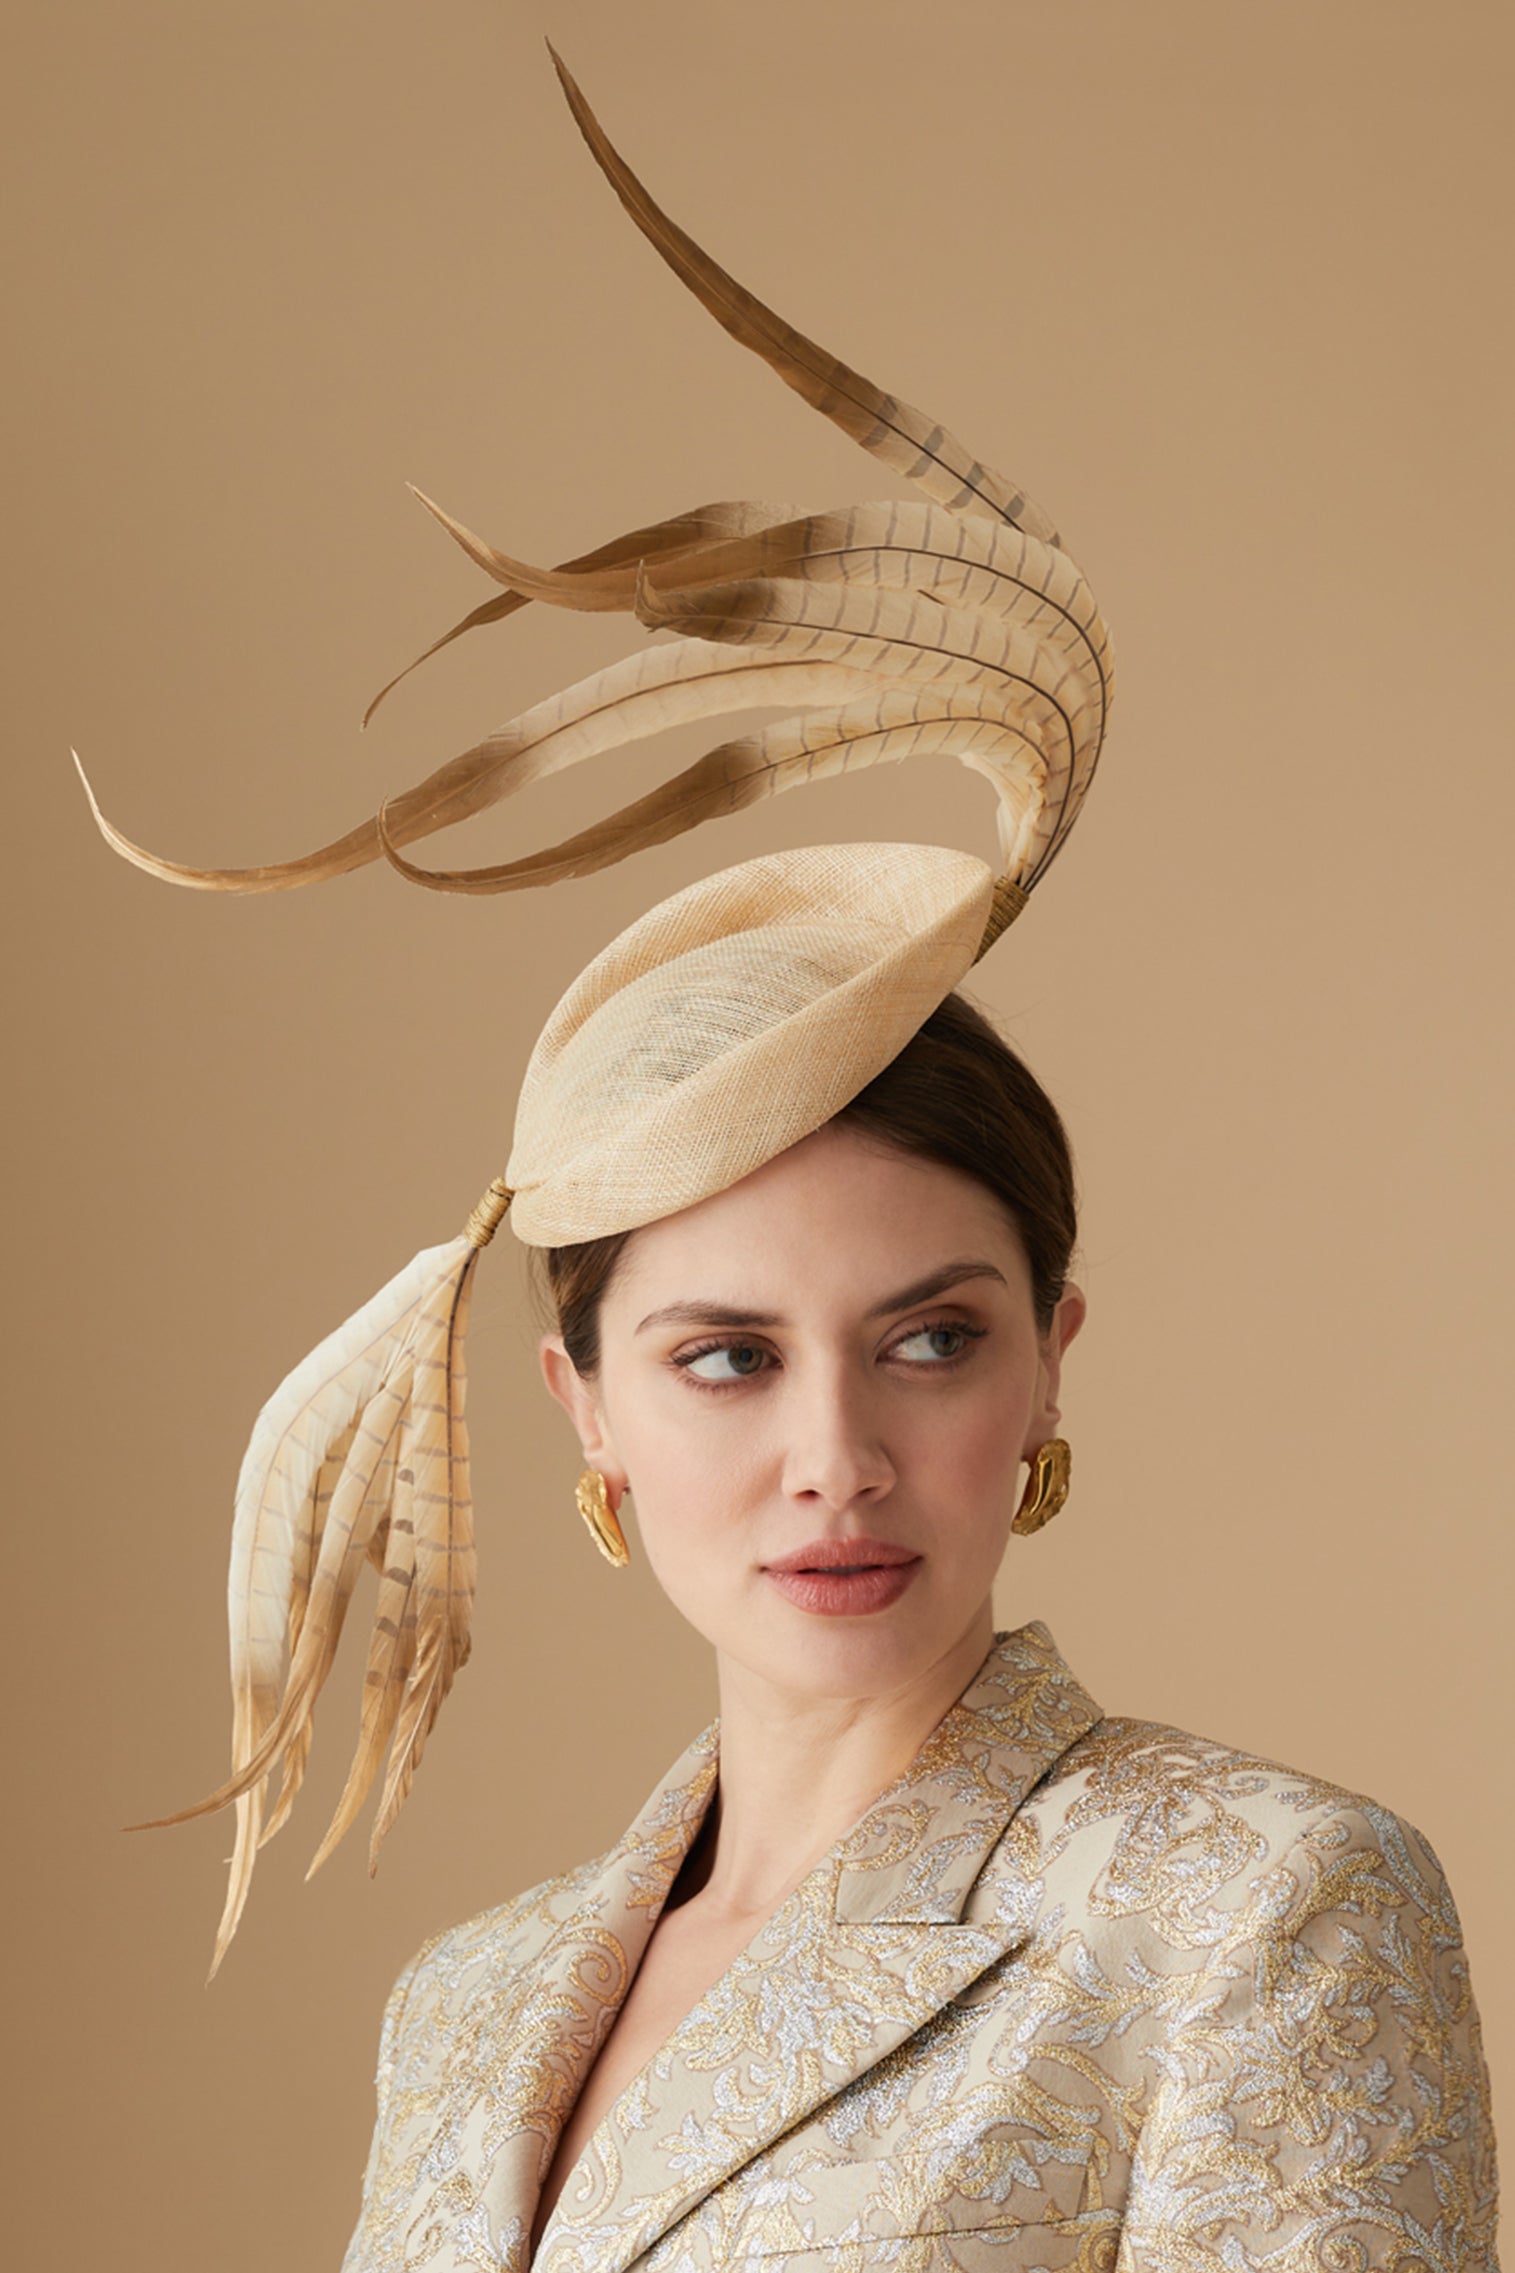 Lapsang Natural Percher Hat - Lock Couture by Awon Golding - Lock & Co. Hatters London UK